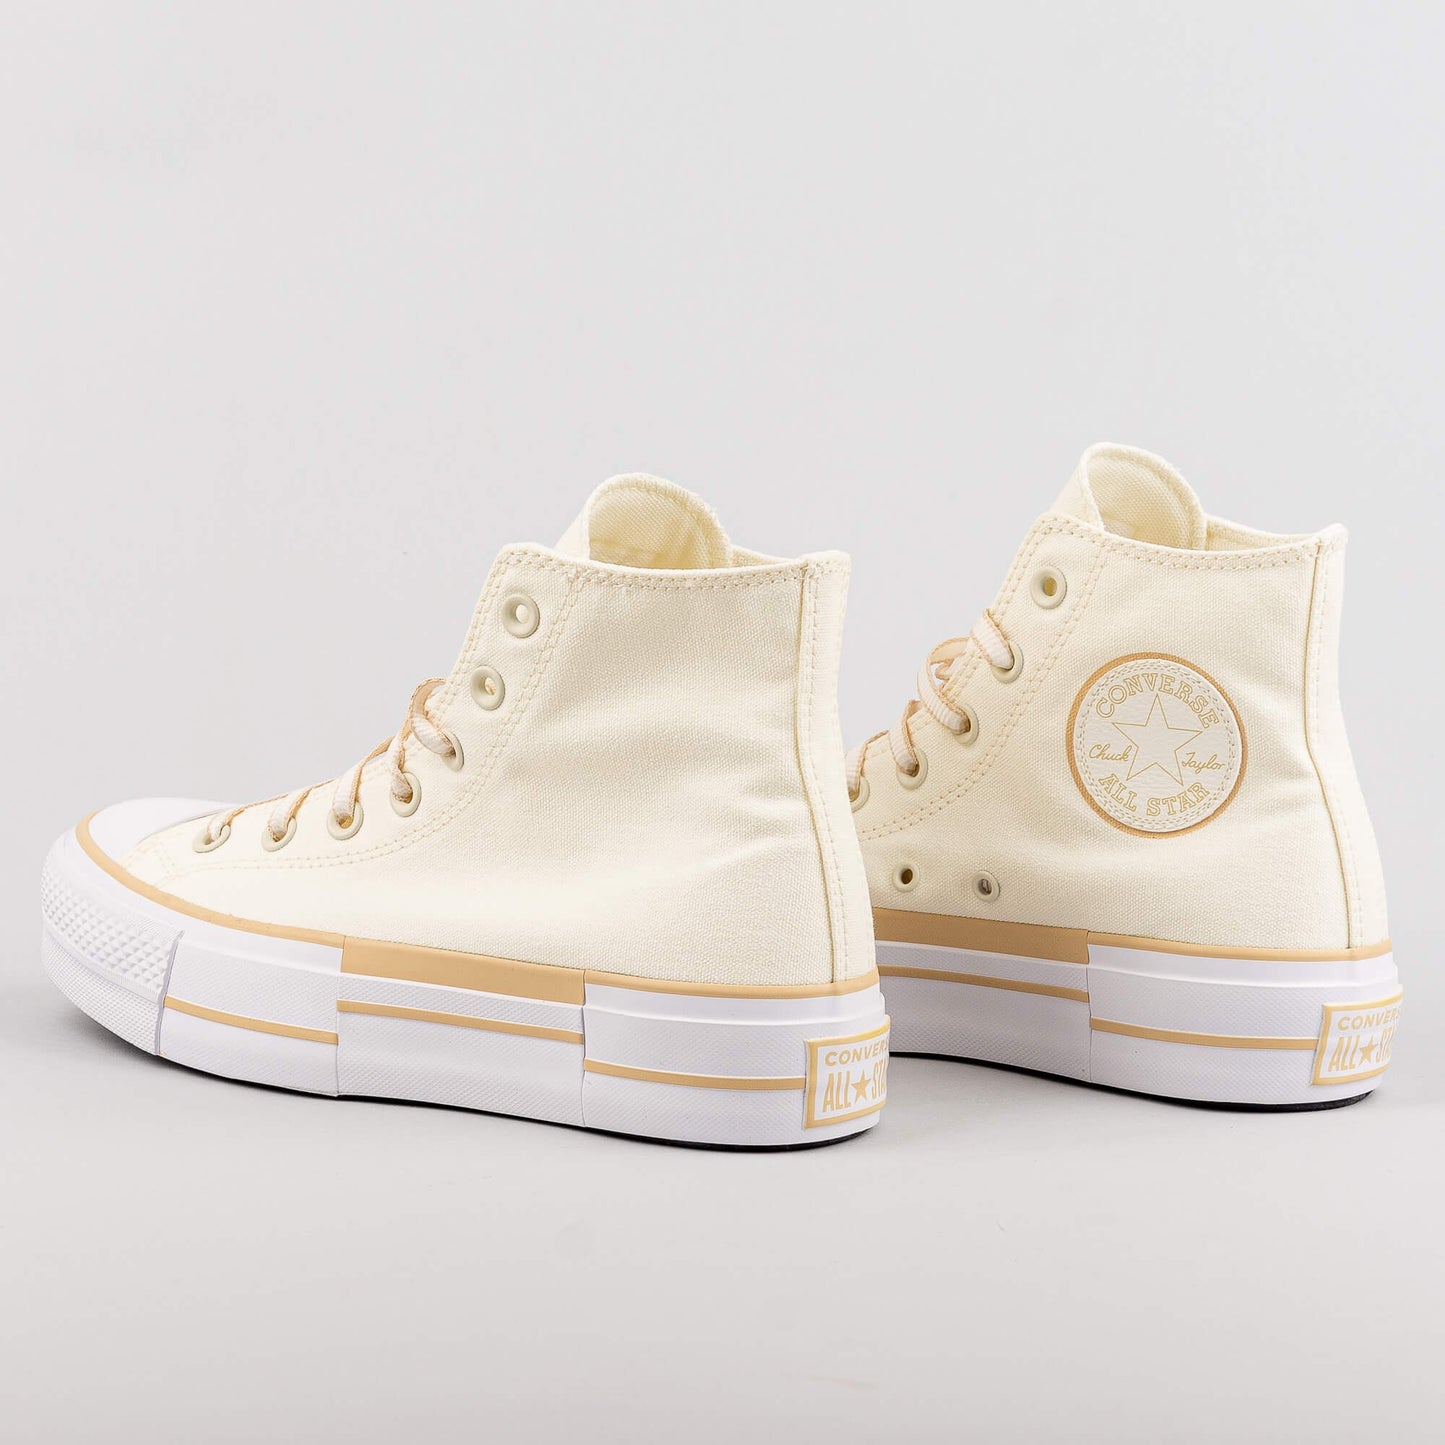 Convserse Womens Converse Chuck Taylor All Star Lift Outline Sketch High Top Oat Milk/Egret/White